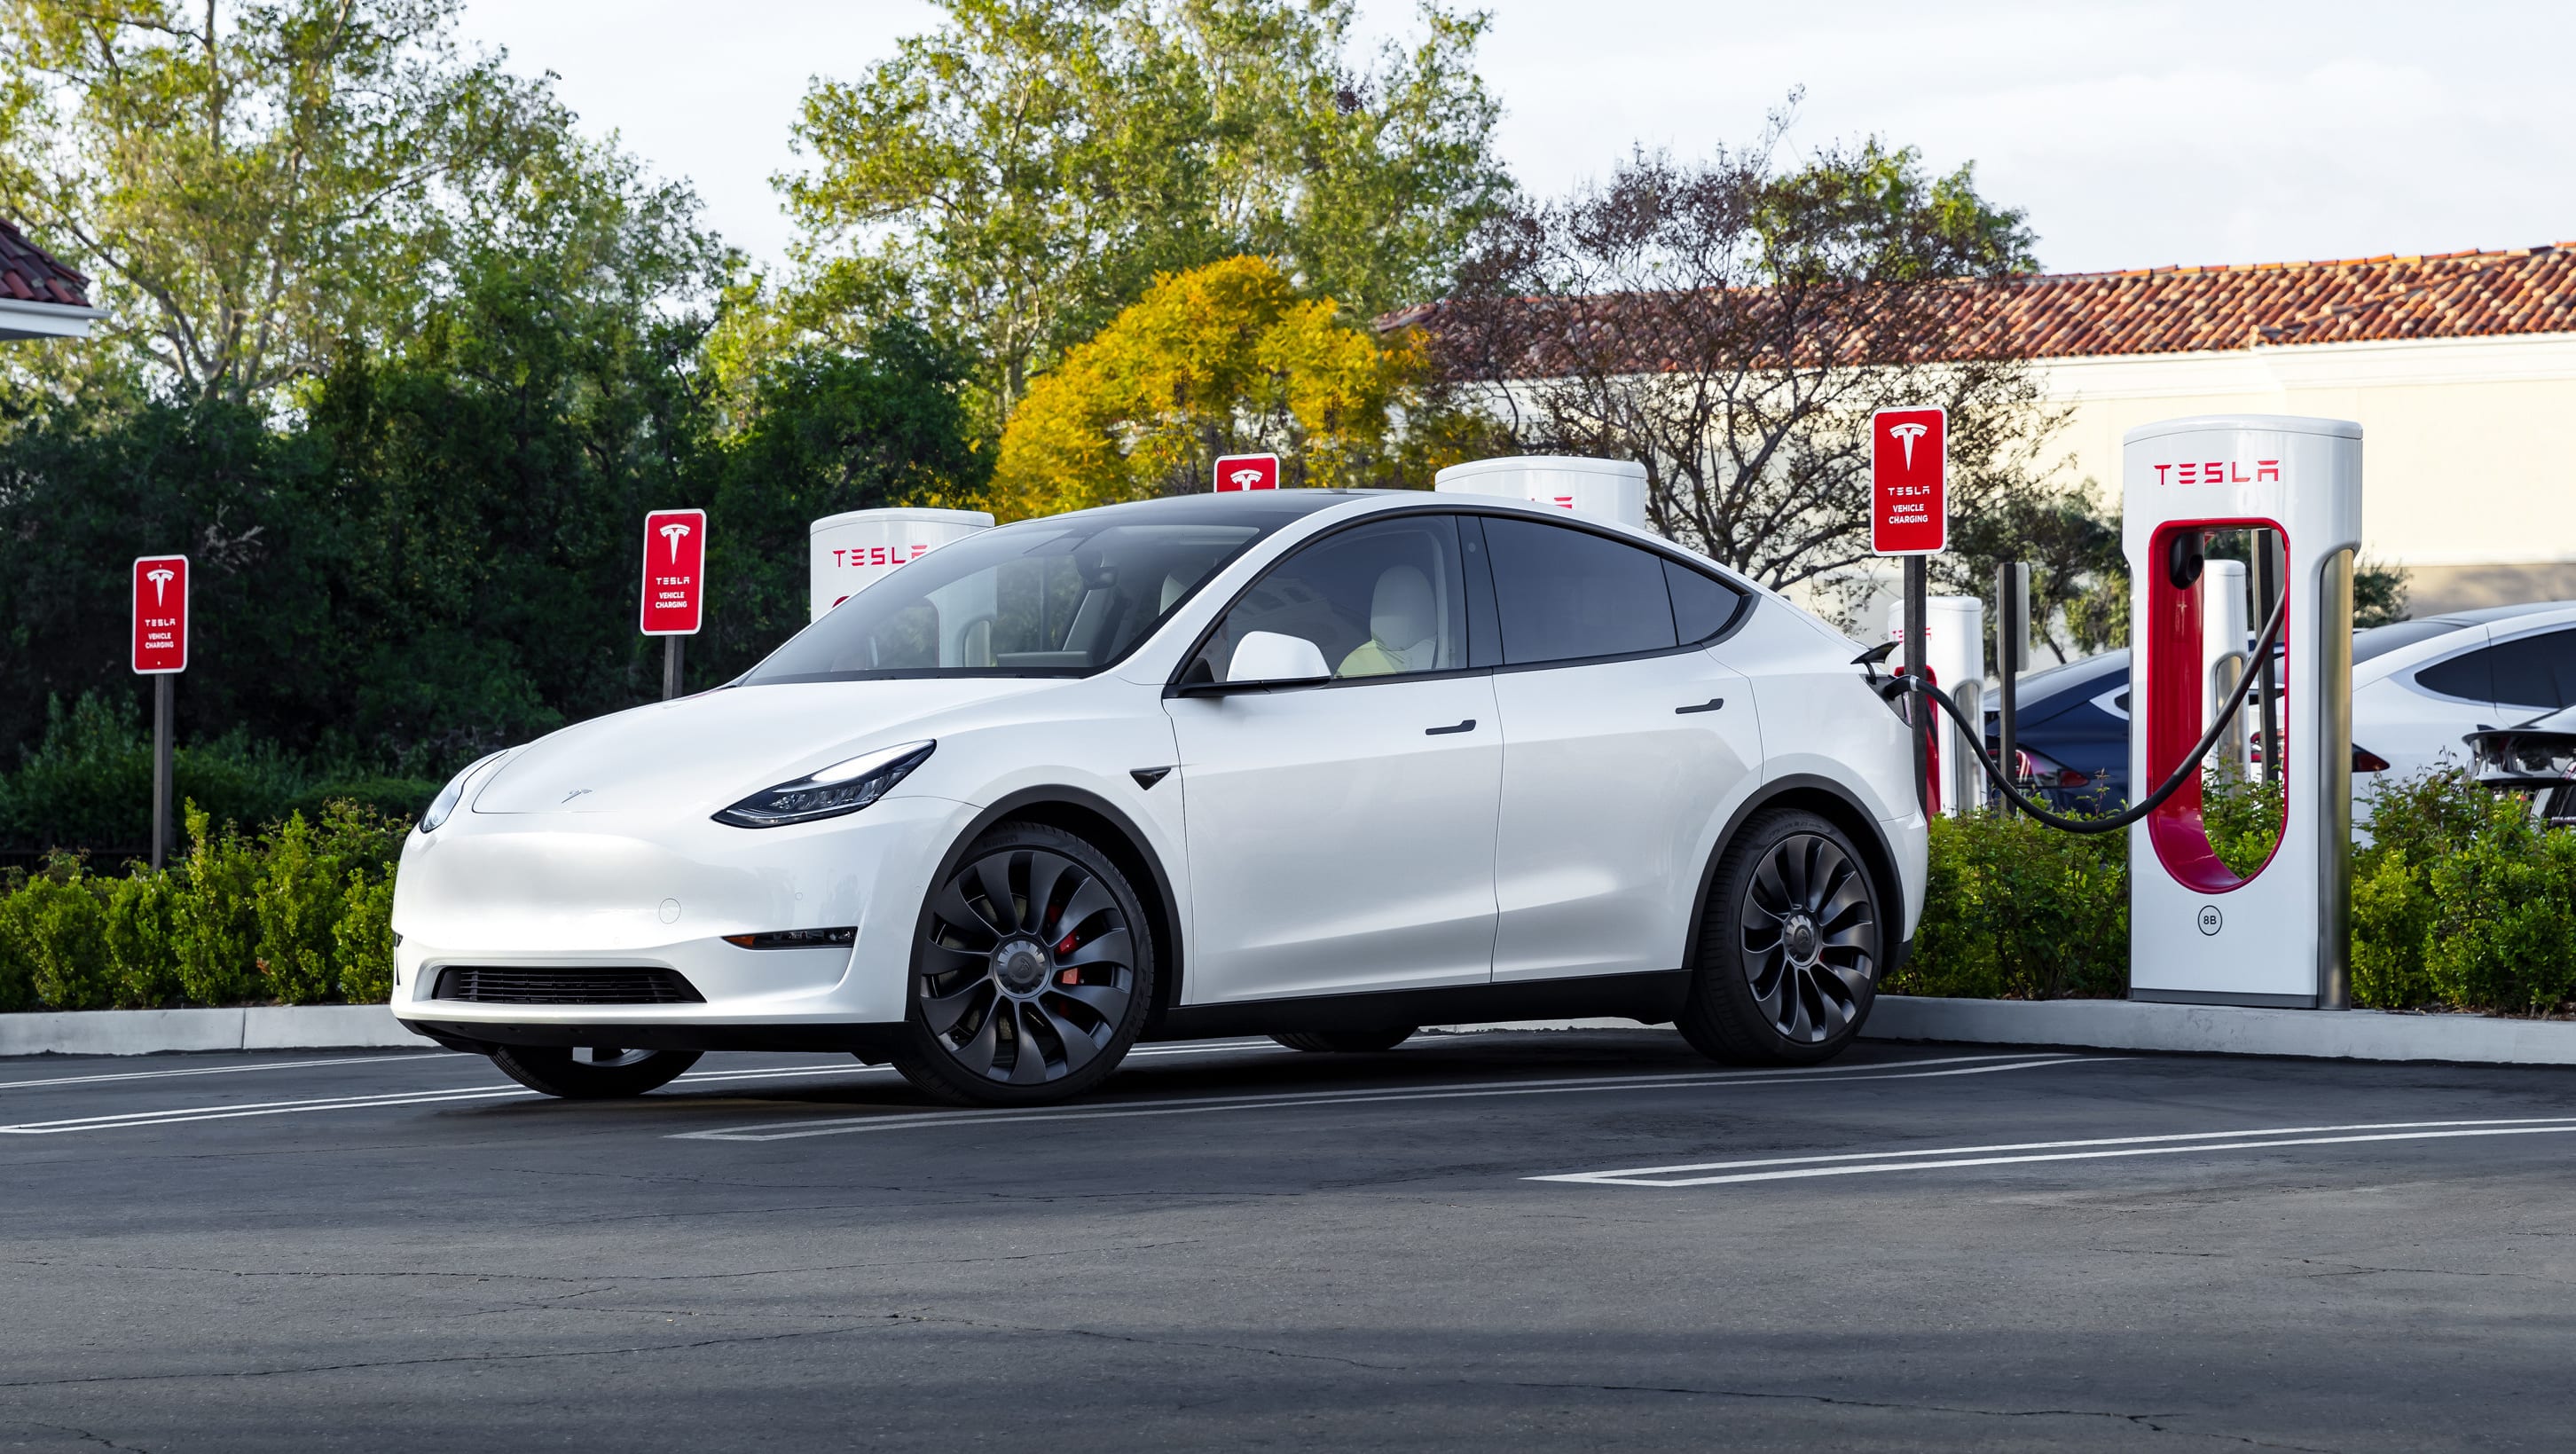 Tesla has just changed the EV game in Australia